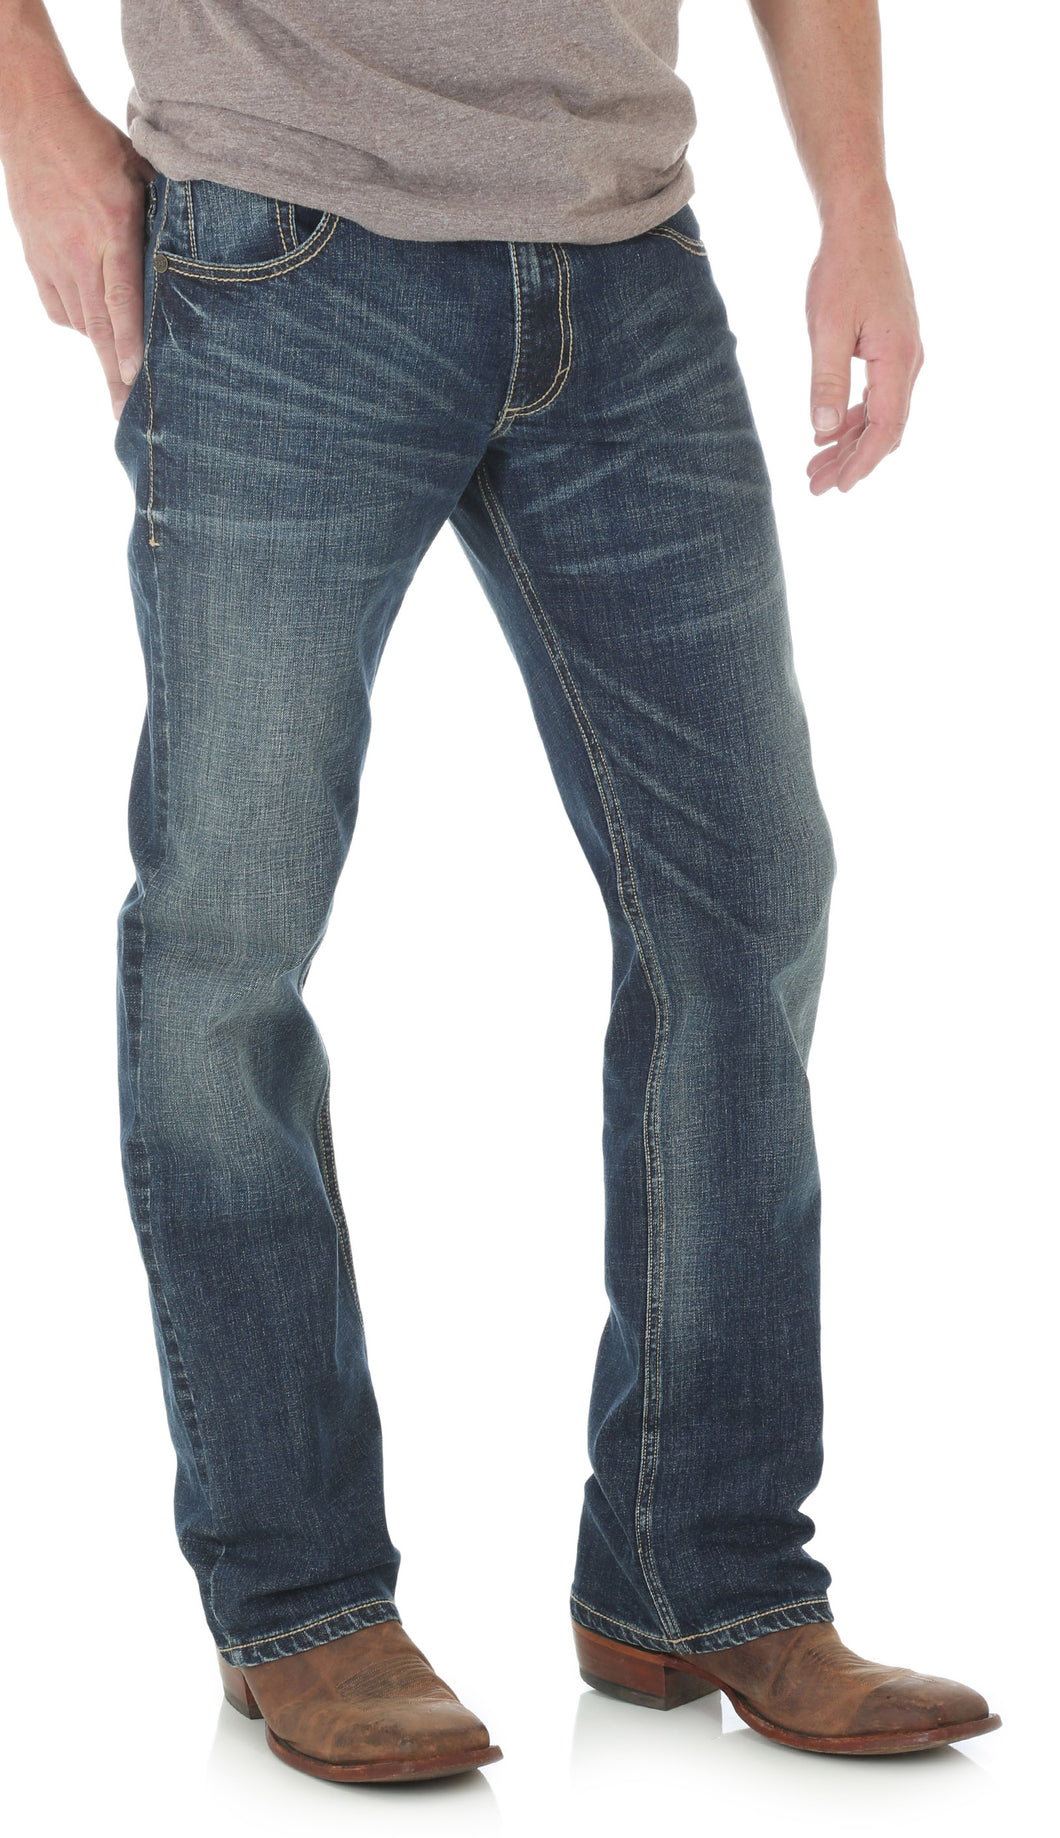 Retro Slim Fit Layton Jeans from Wrangler – Pard's Western Shop Inc.